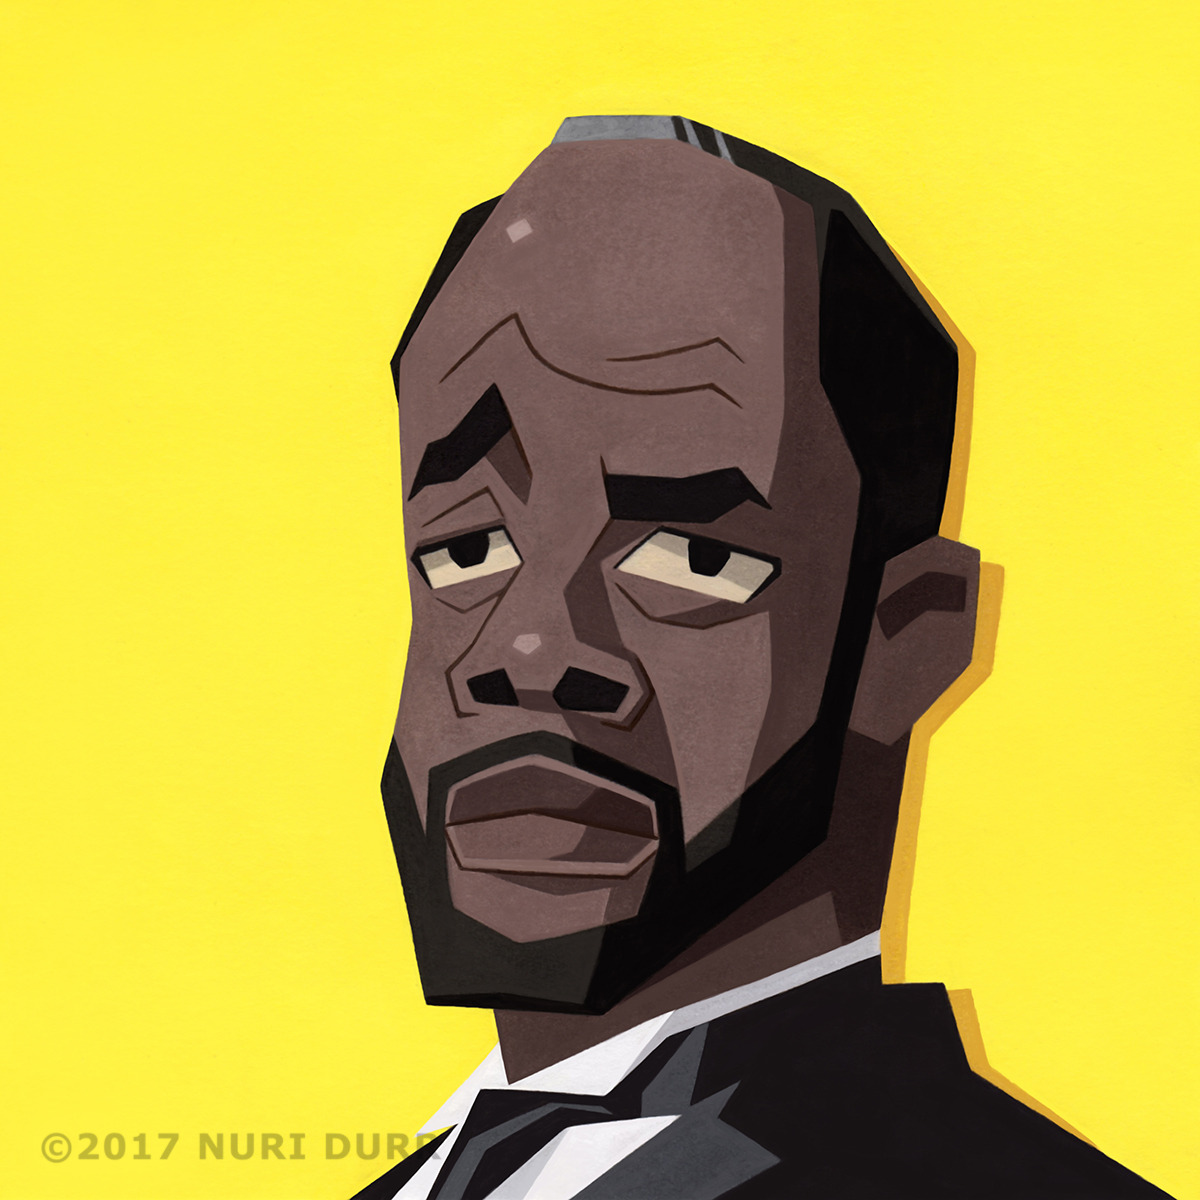 jettestblack:  nuridurr:  I did as series of pieces inspired by The Fresh Prince